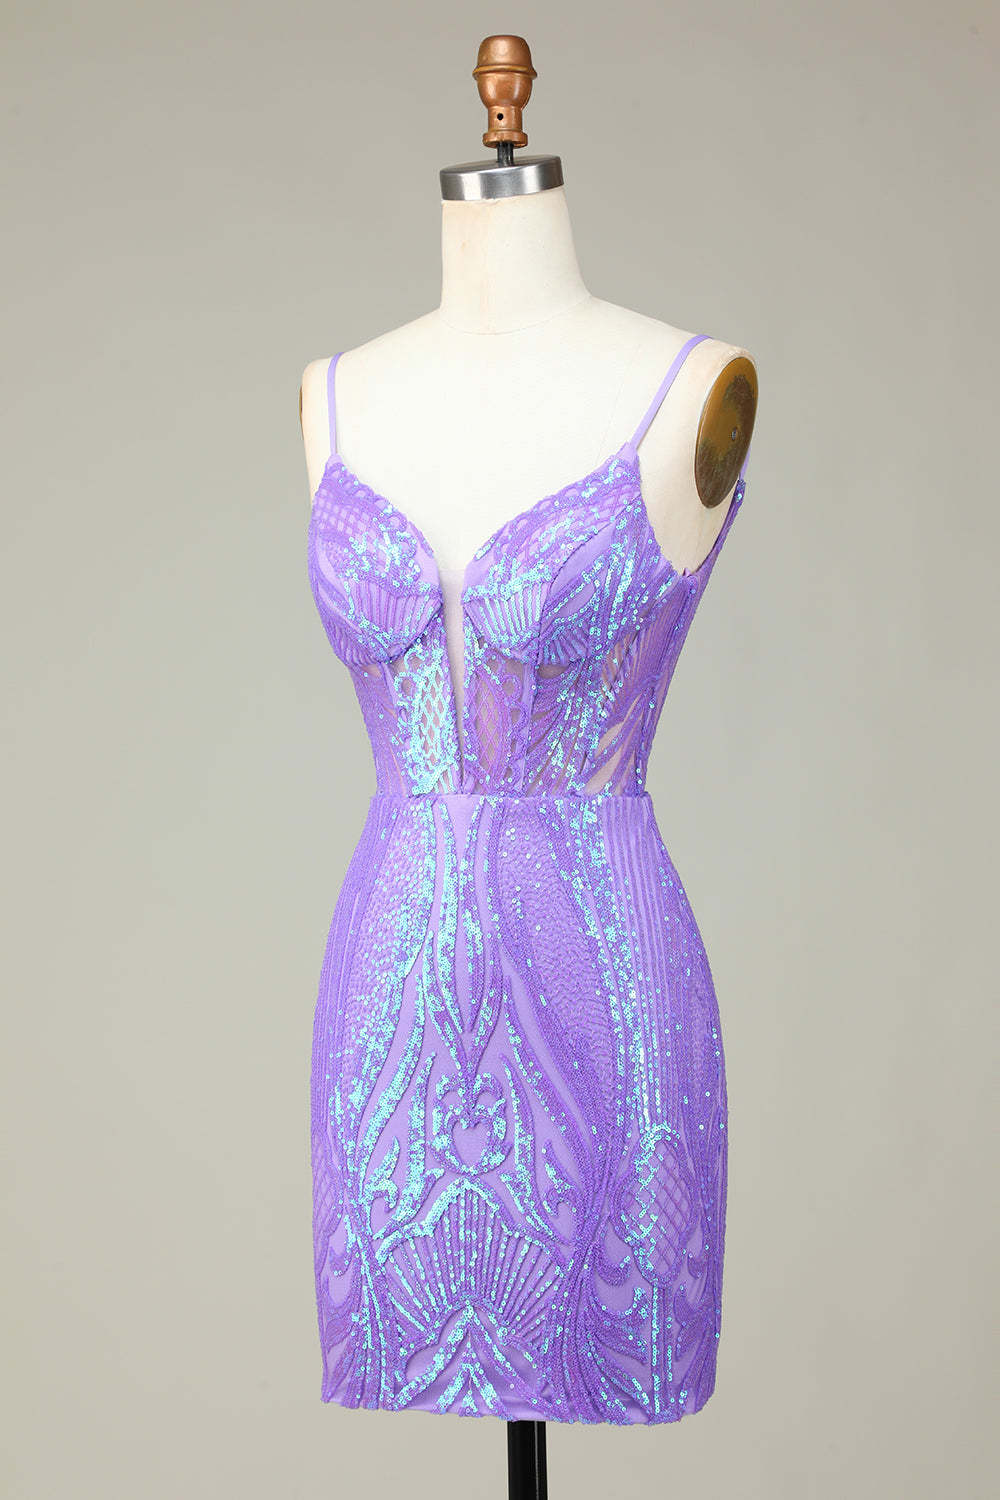 Sparkly Sheath Spaghetti Straps Lilac Sequins Short Homecoming Dress with Criss Cross Back